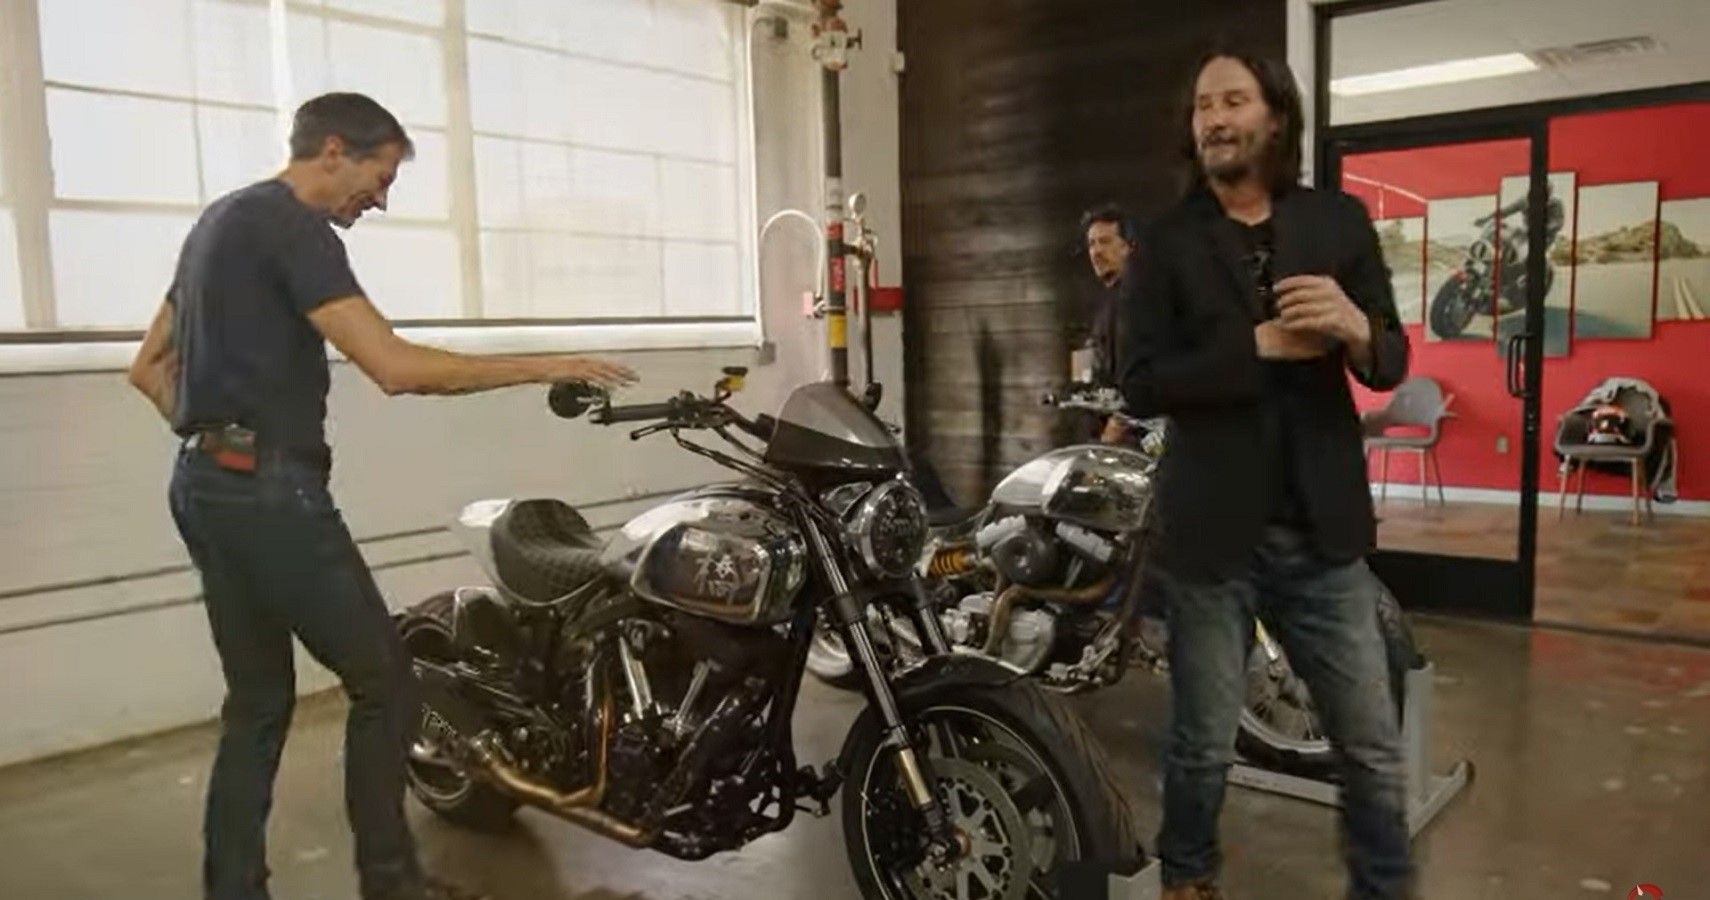 Keanu Reeves and Guy Pickrell, motorcycle in center